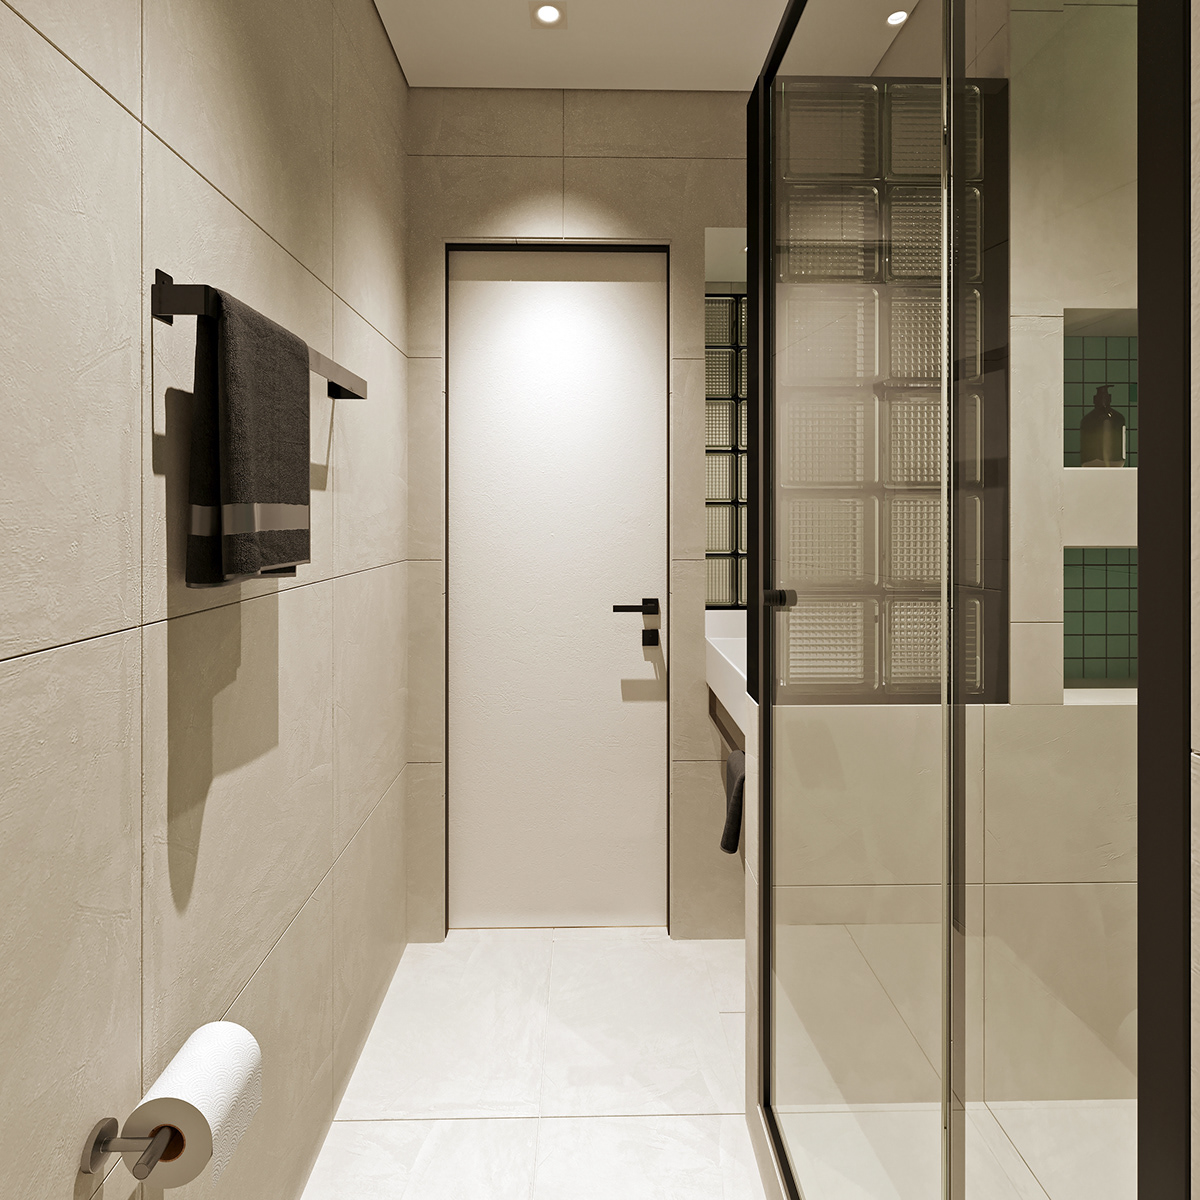 Simple stainless steel horizontal bar hooks in the bathroom help to create convenience and tidiness.